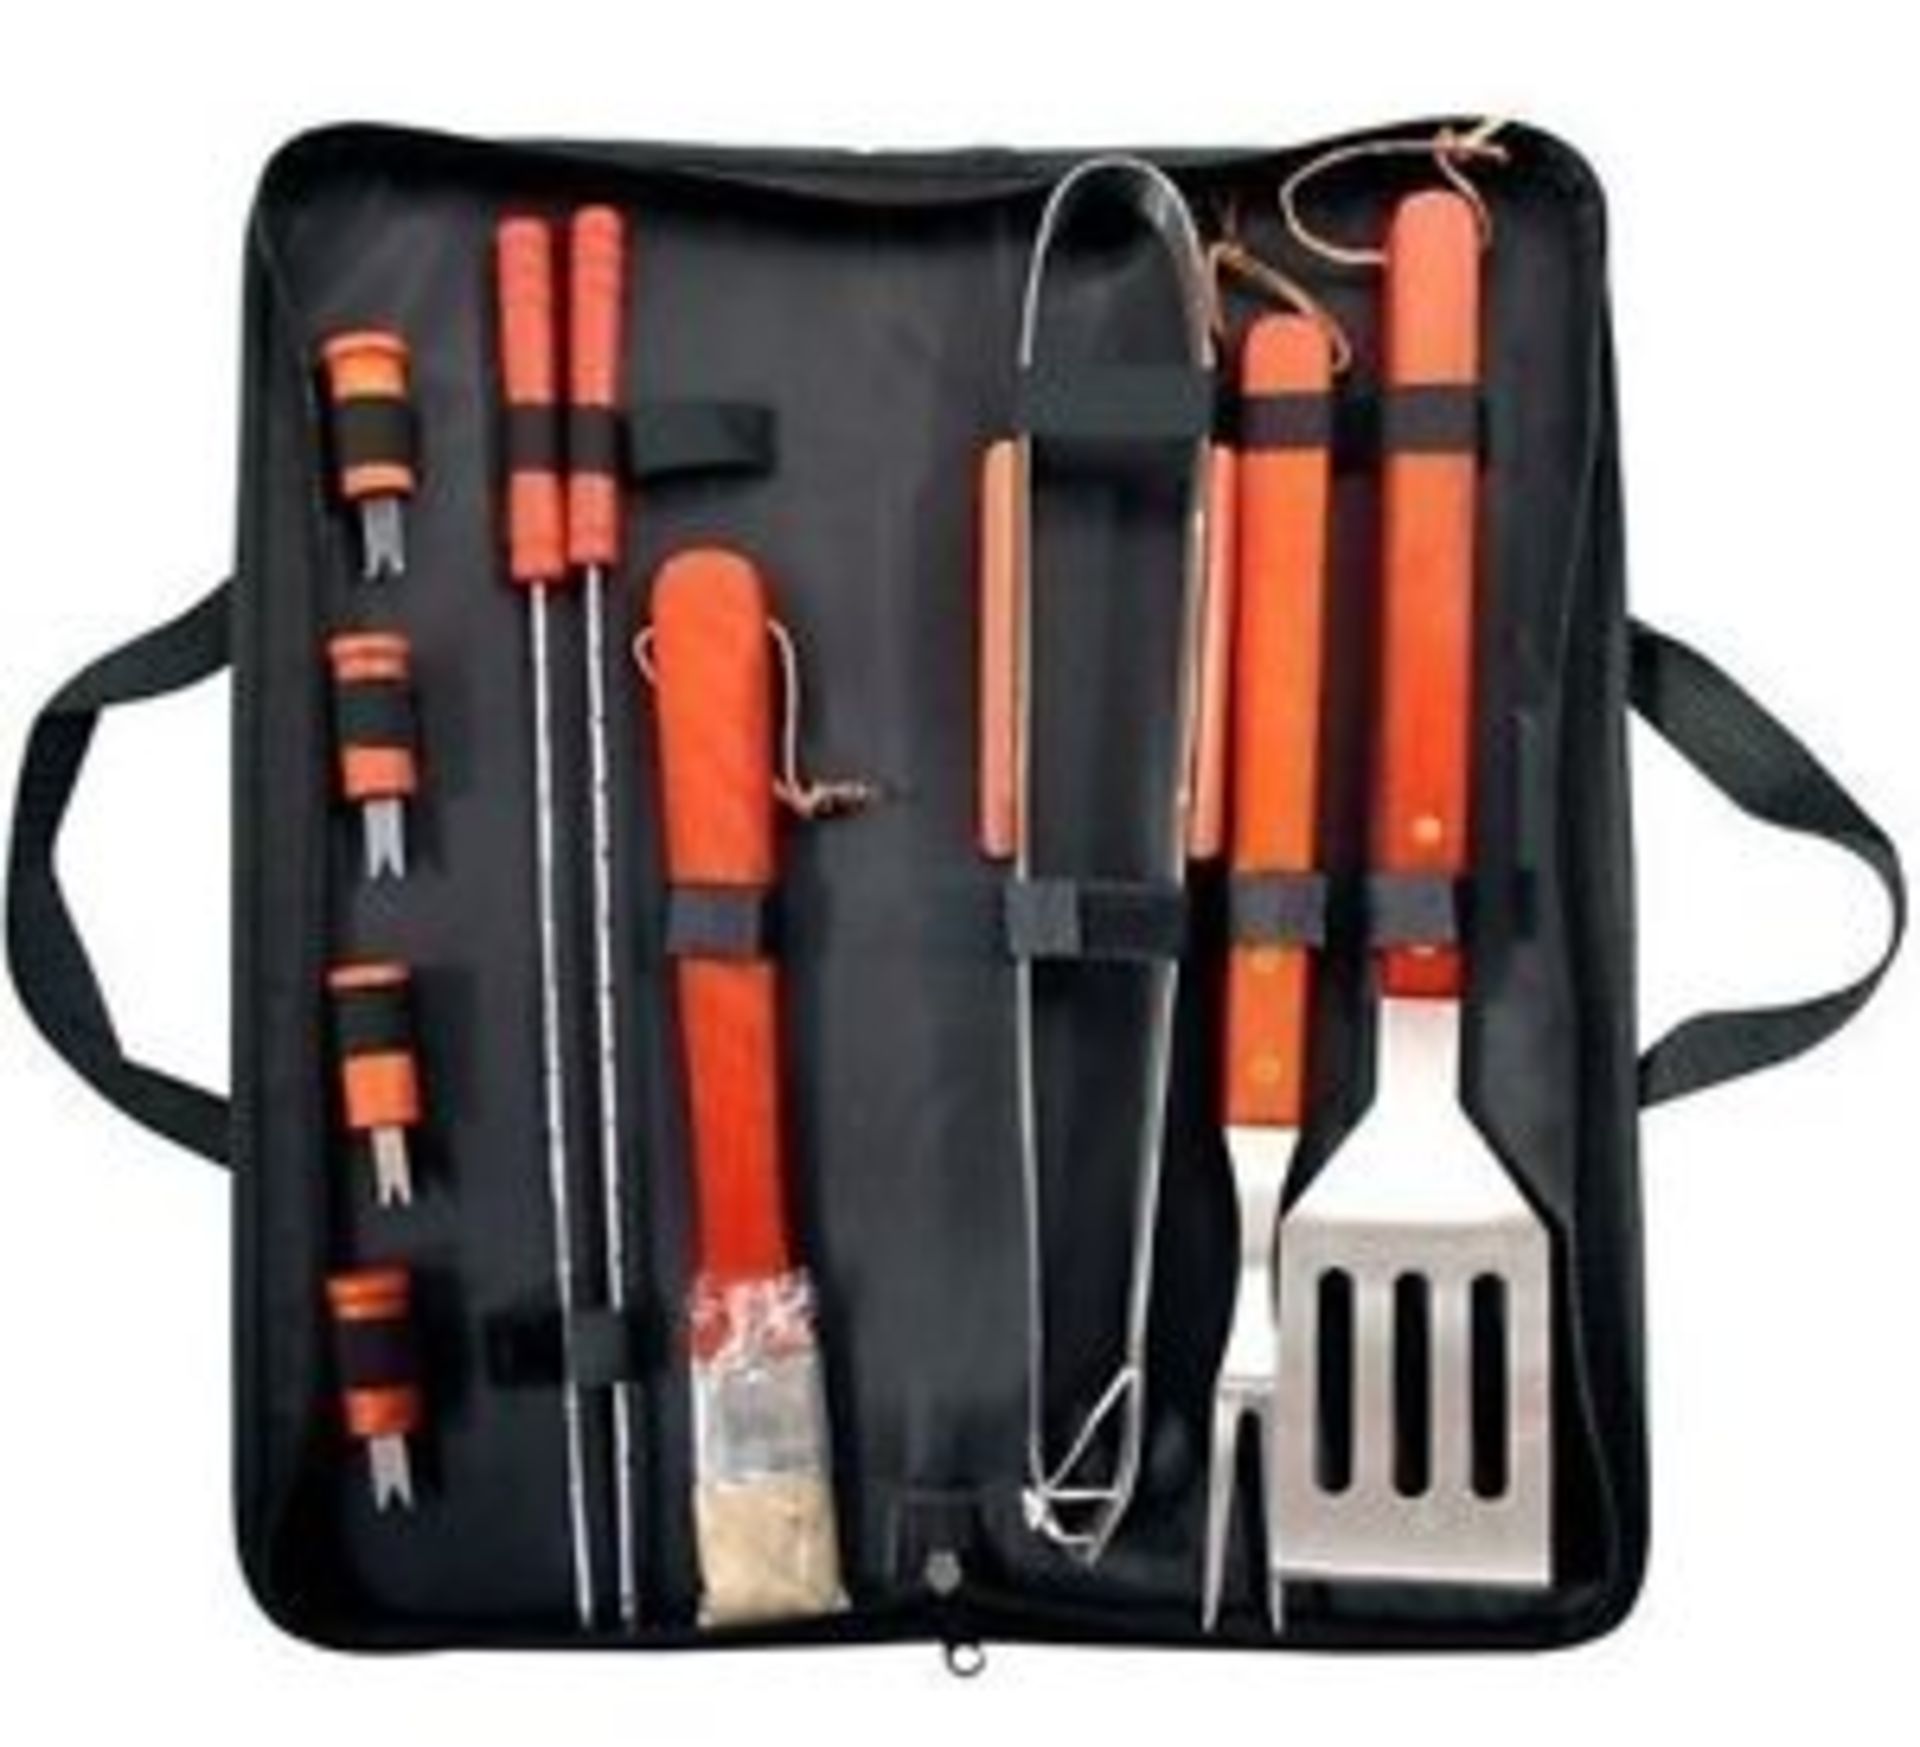 V Brand New Stainless Steel BBQ Toolkit With 11 Pieces in Carry Case Including Tongs - Slice -